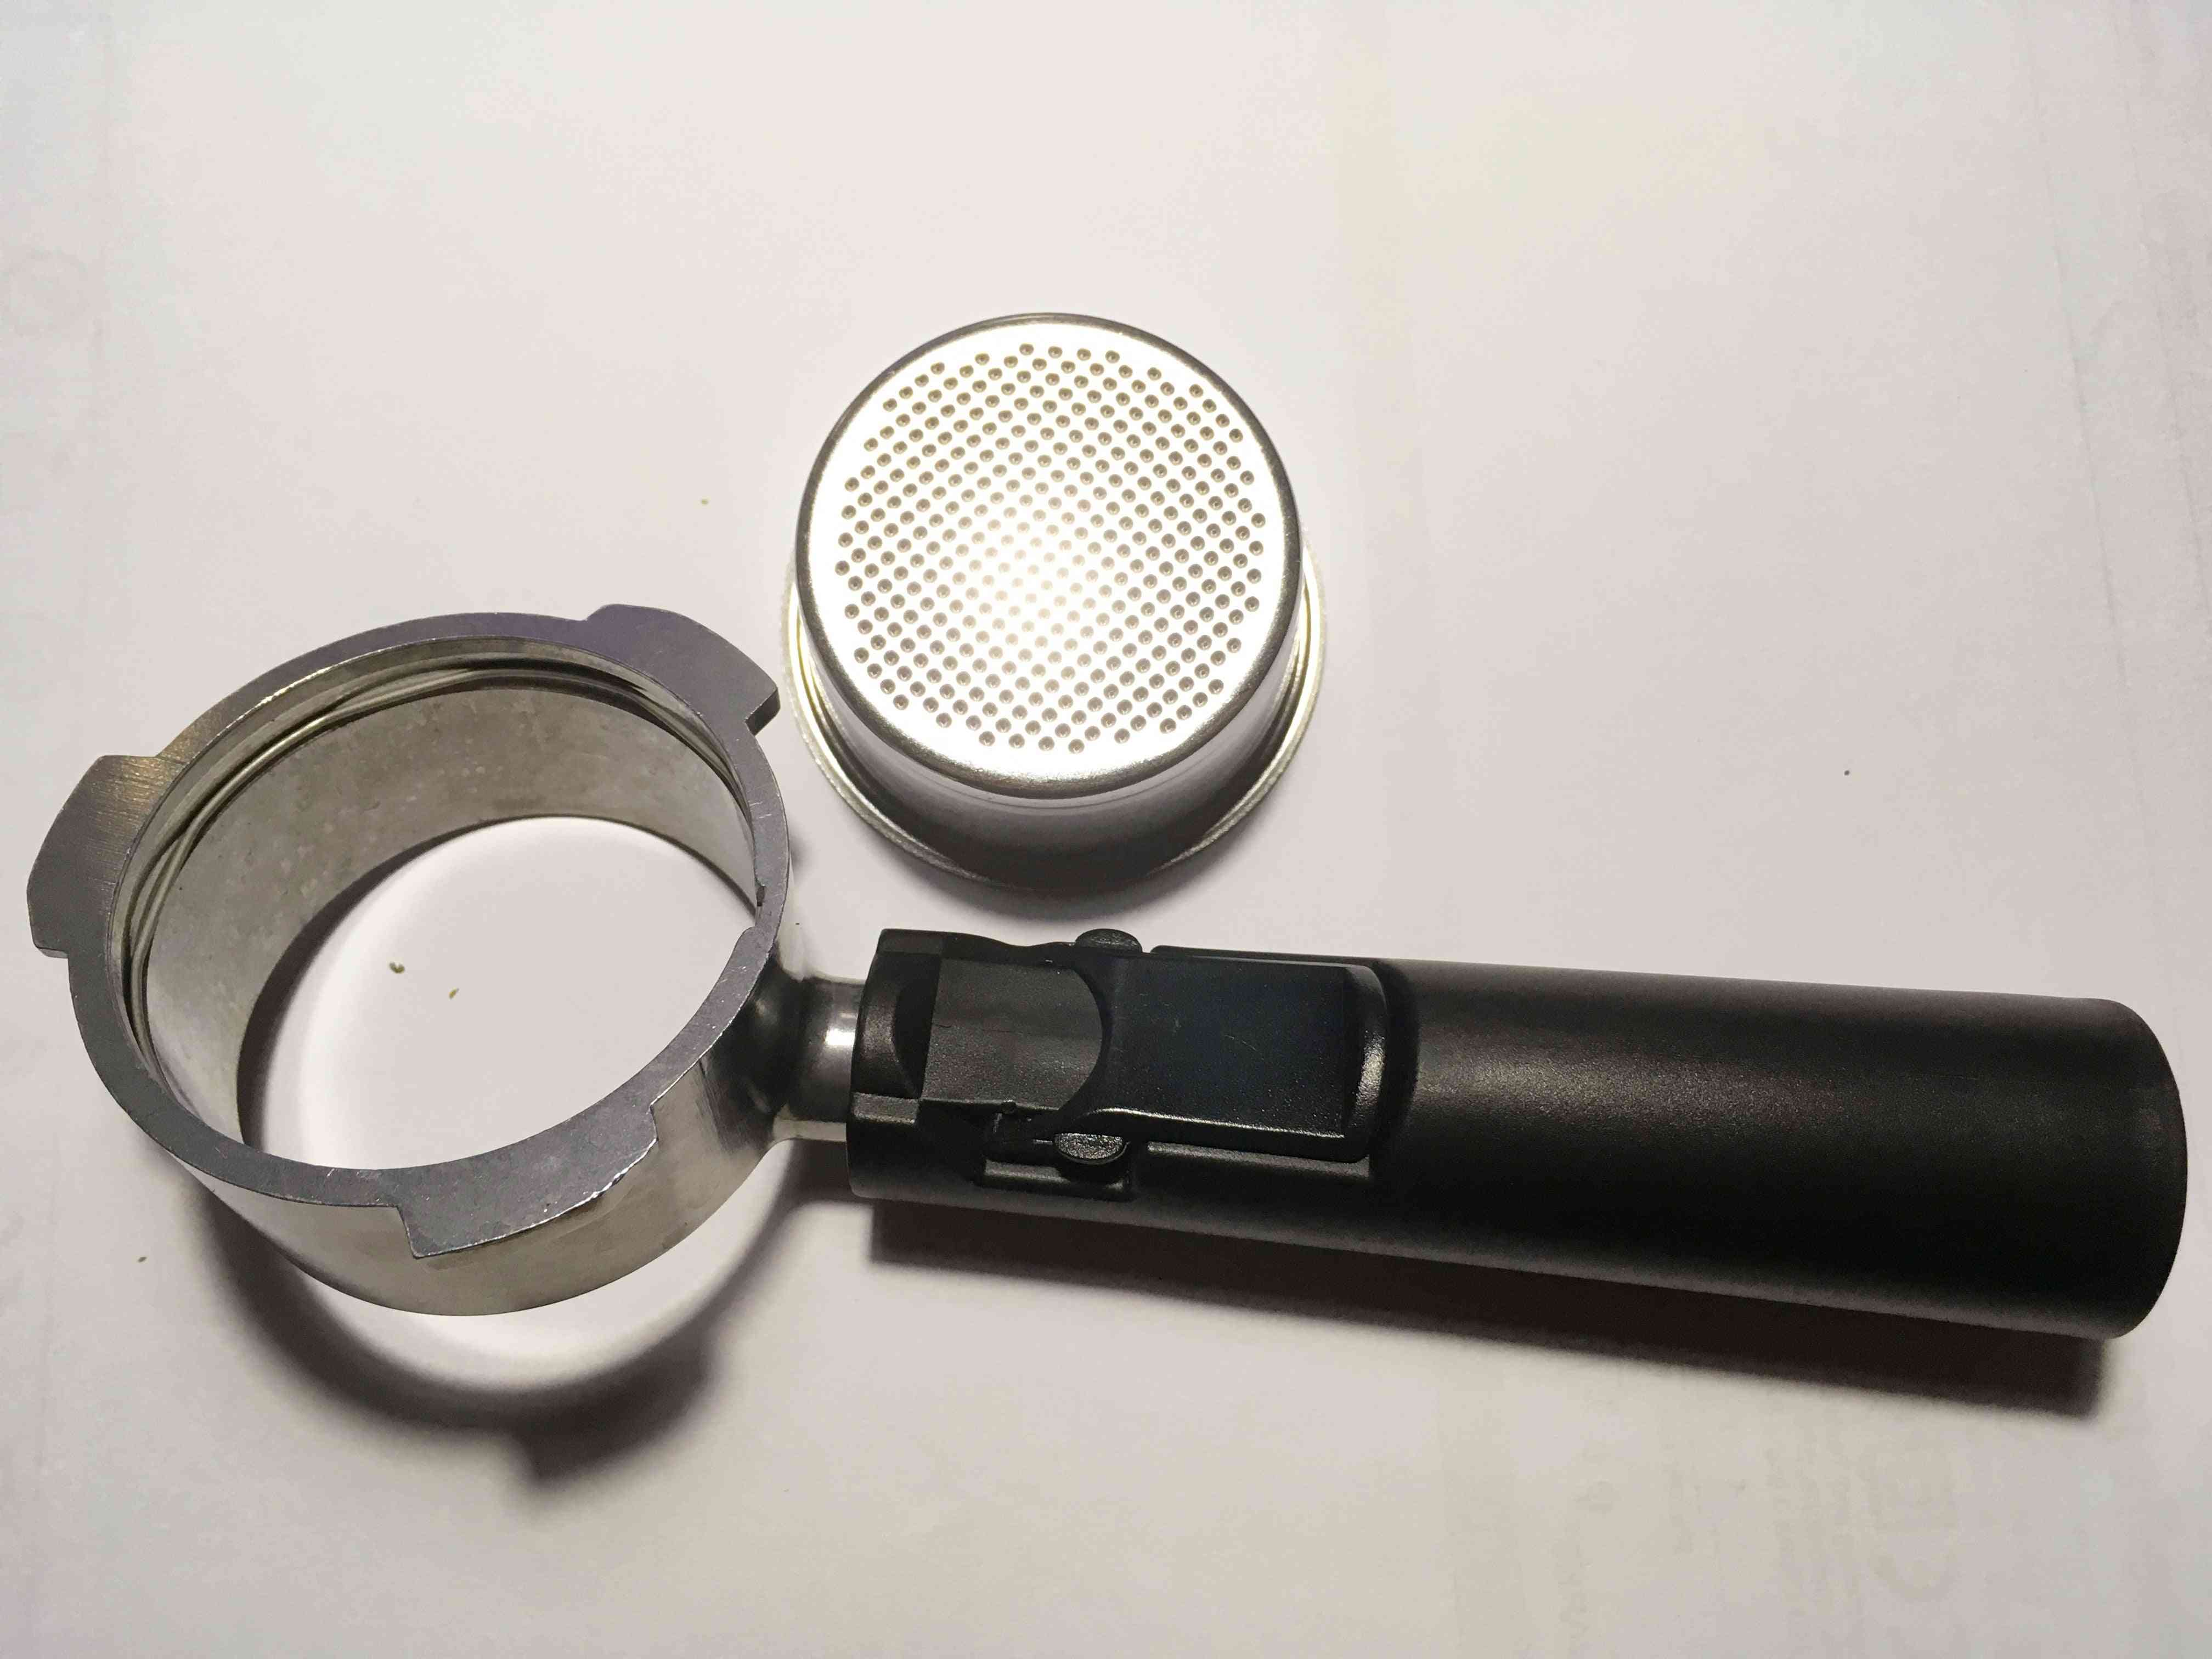 Bottomless-filter Holder Of Espresso Coffee Maker Parts